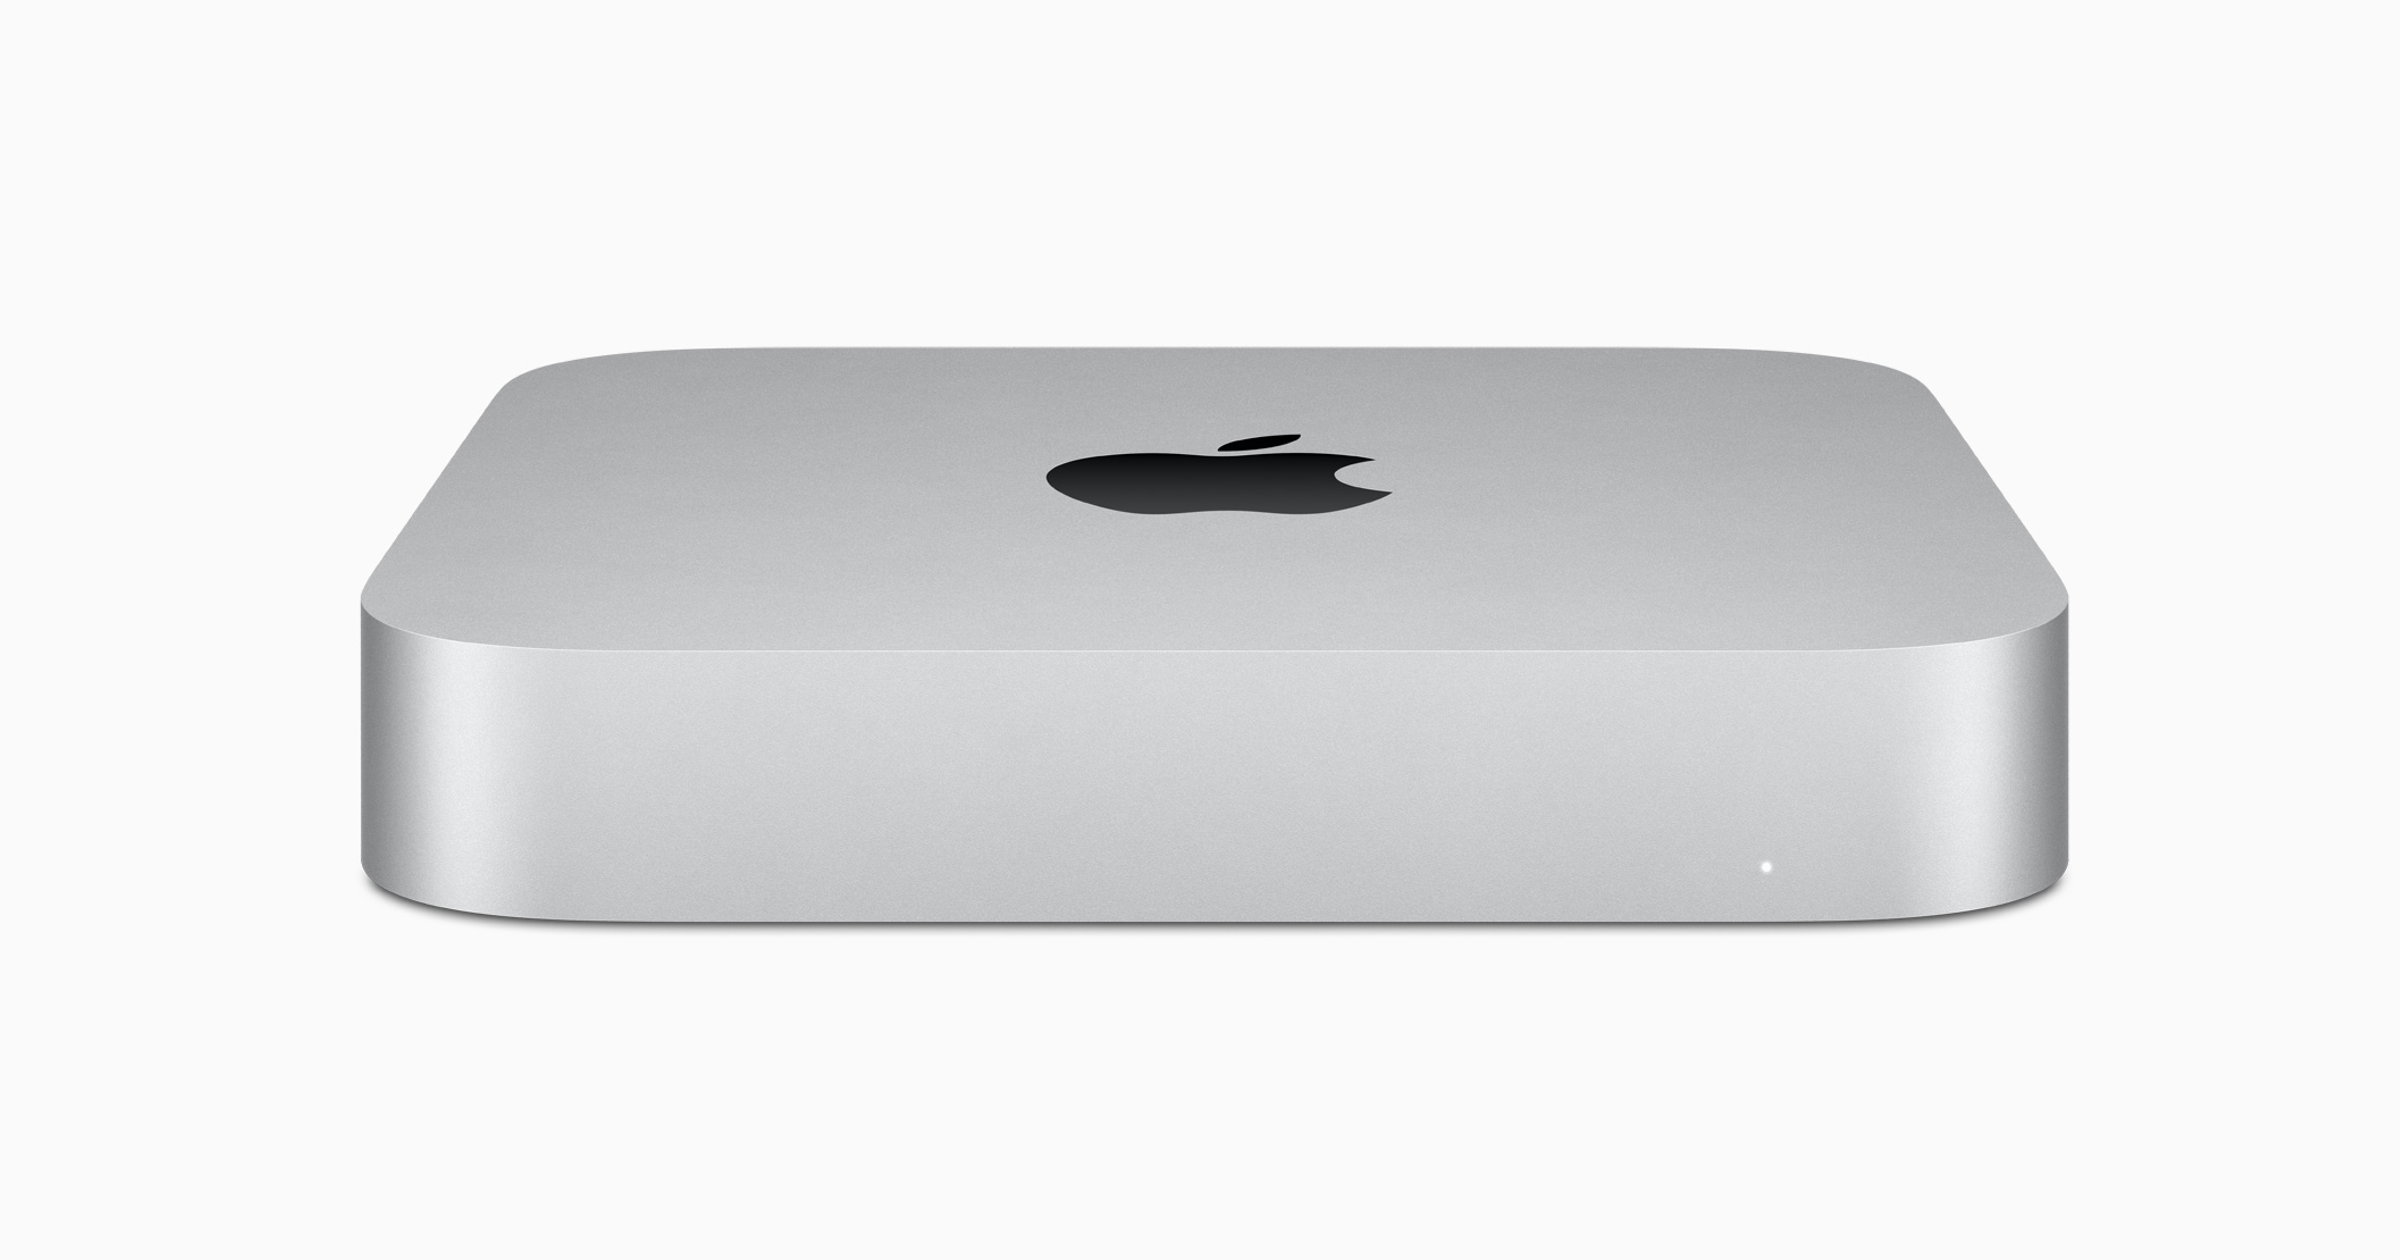 Why The New Mac mini and M1 Chip is a Big Deal For Hollywood